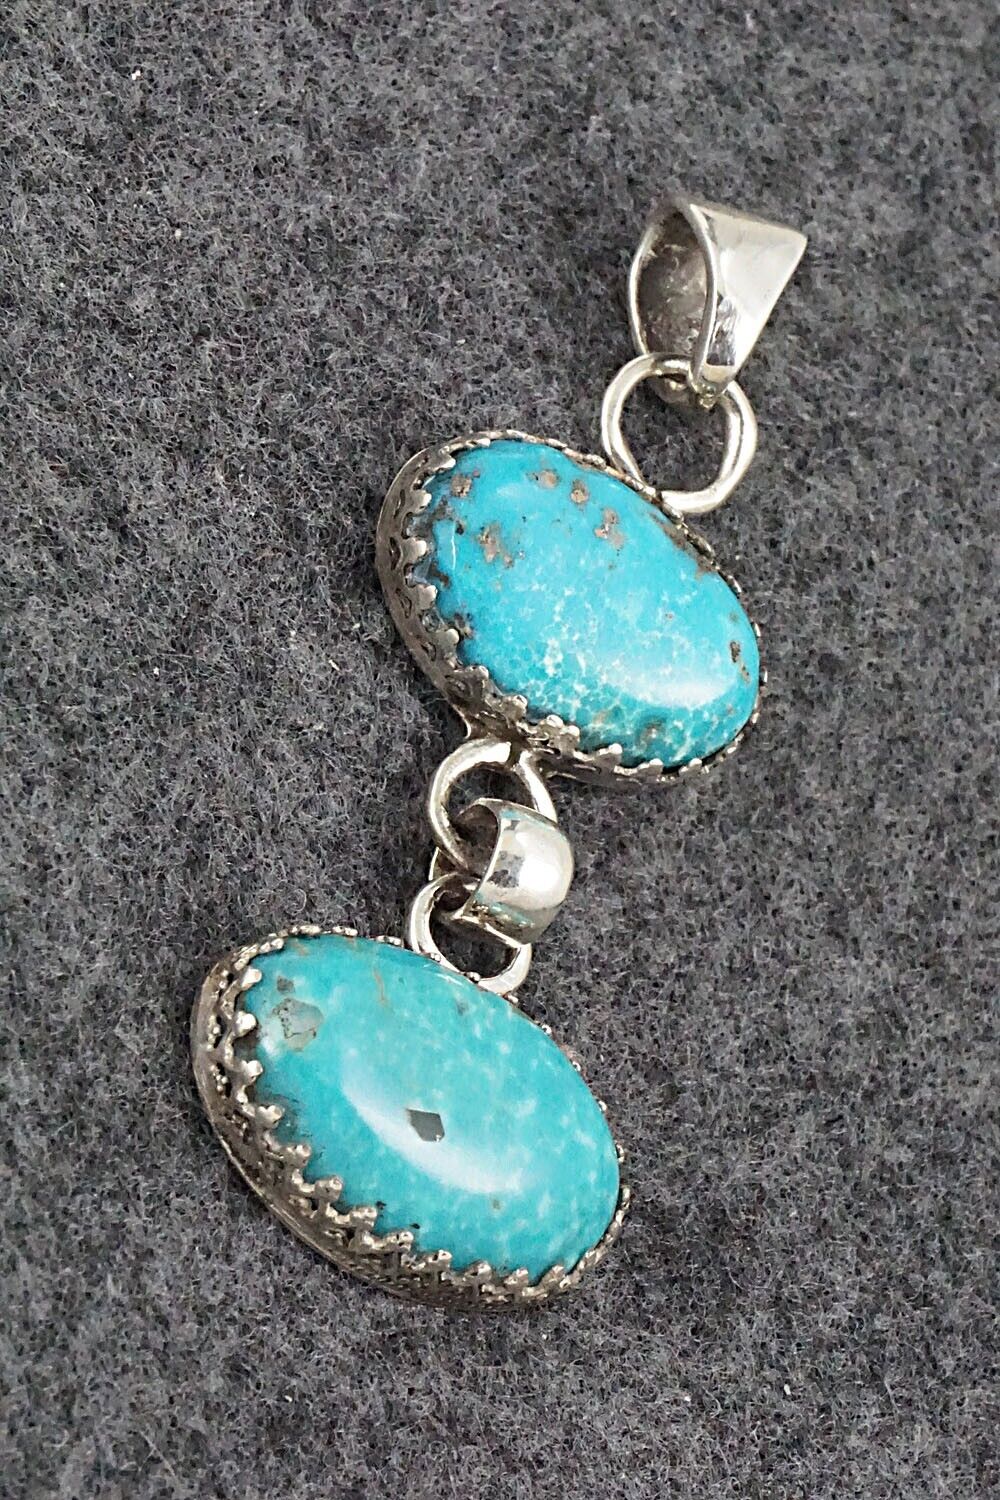 Turquoise and Sterling Silver Pendant - Matilda Chattin